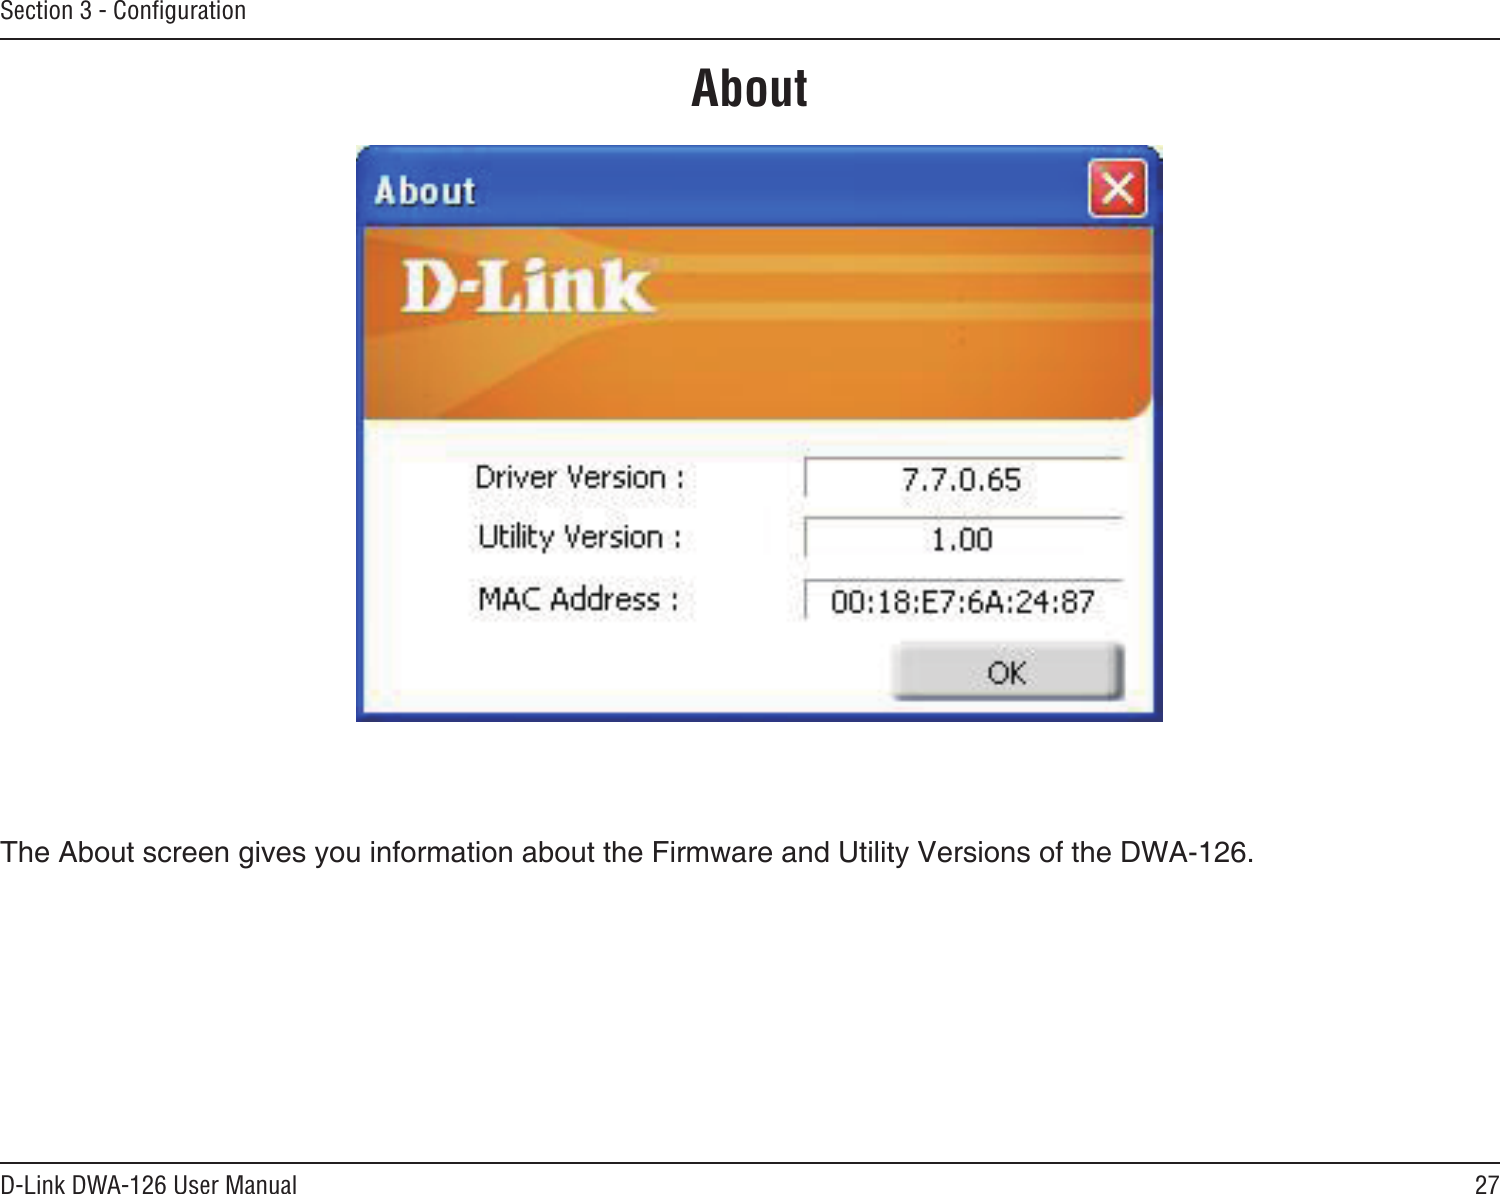 27D-Link DWA-126 User ManualSection 3 - ConﬁgurationThe About screen gives you information about the Firmware and Utility Versions of the DWA-126.About